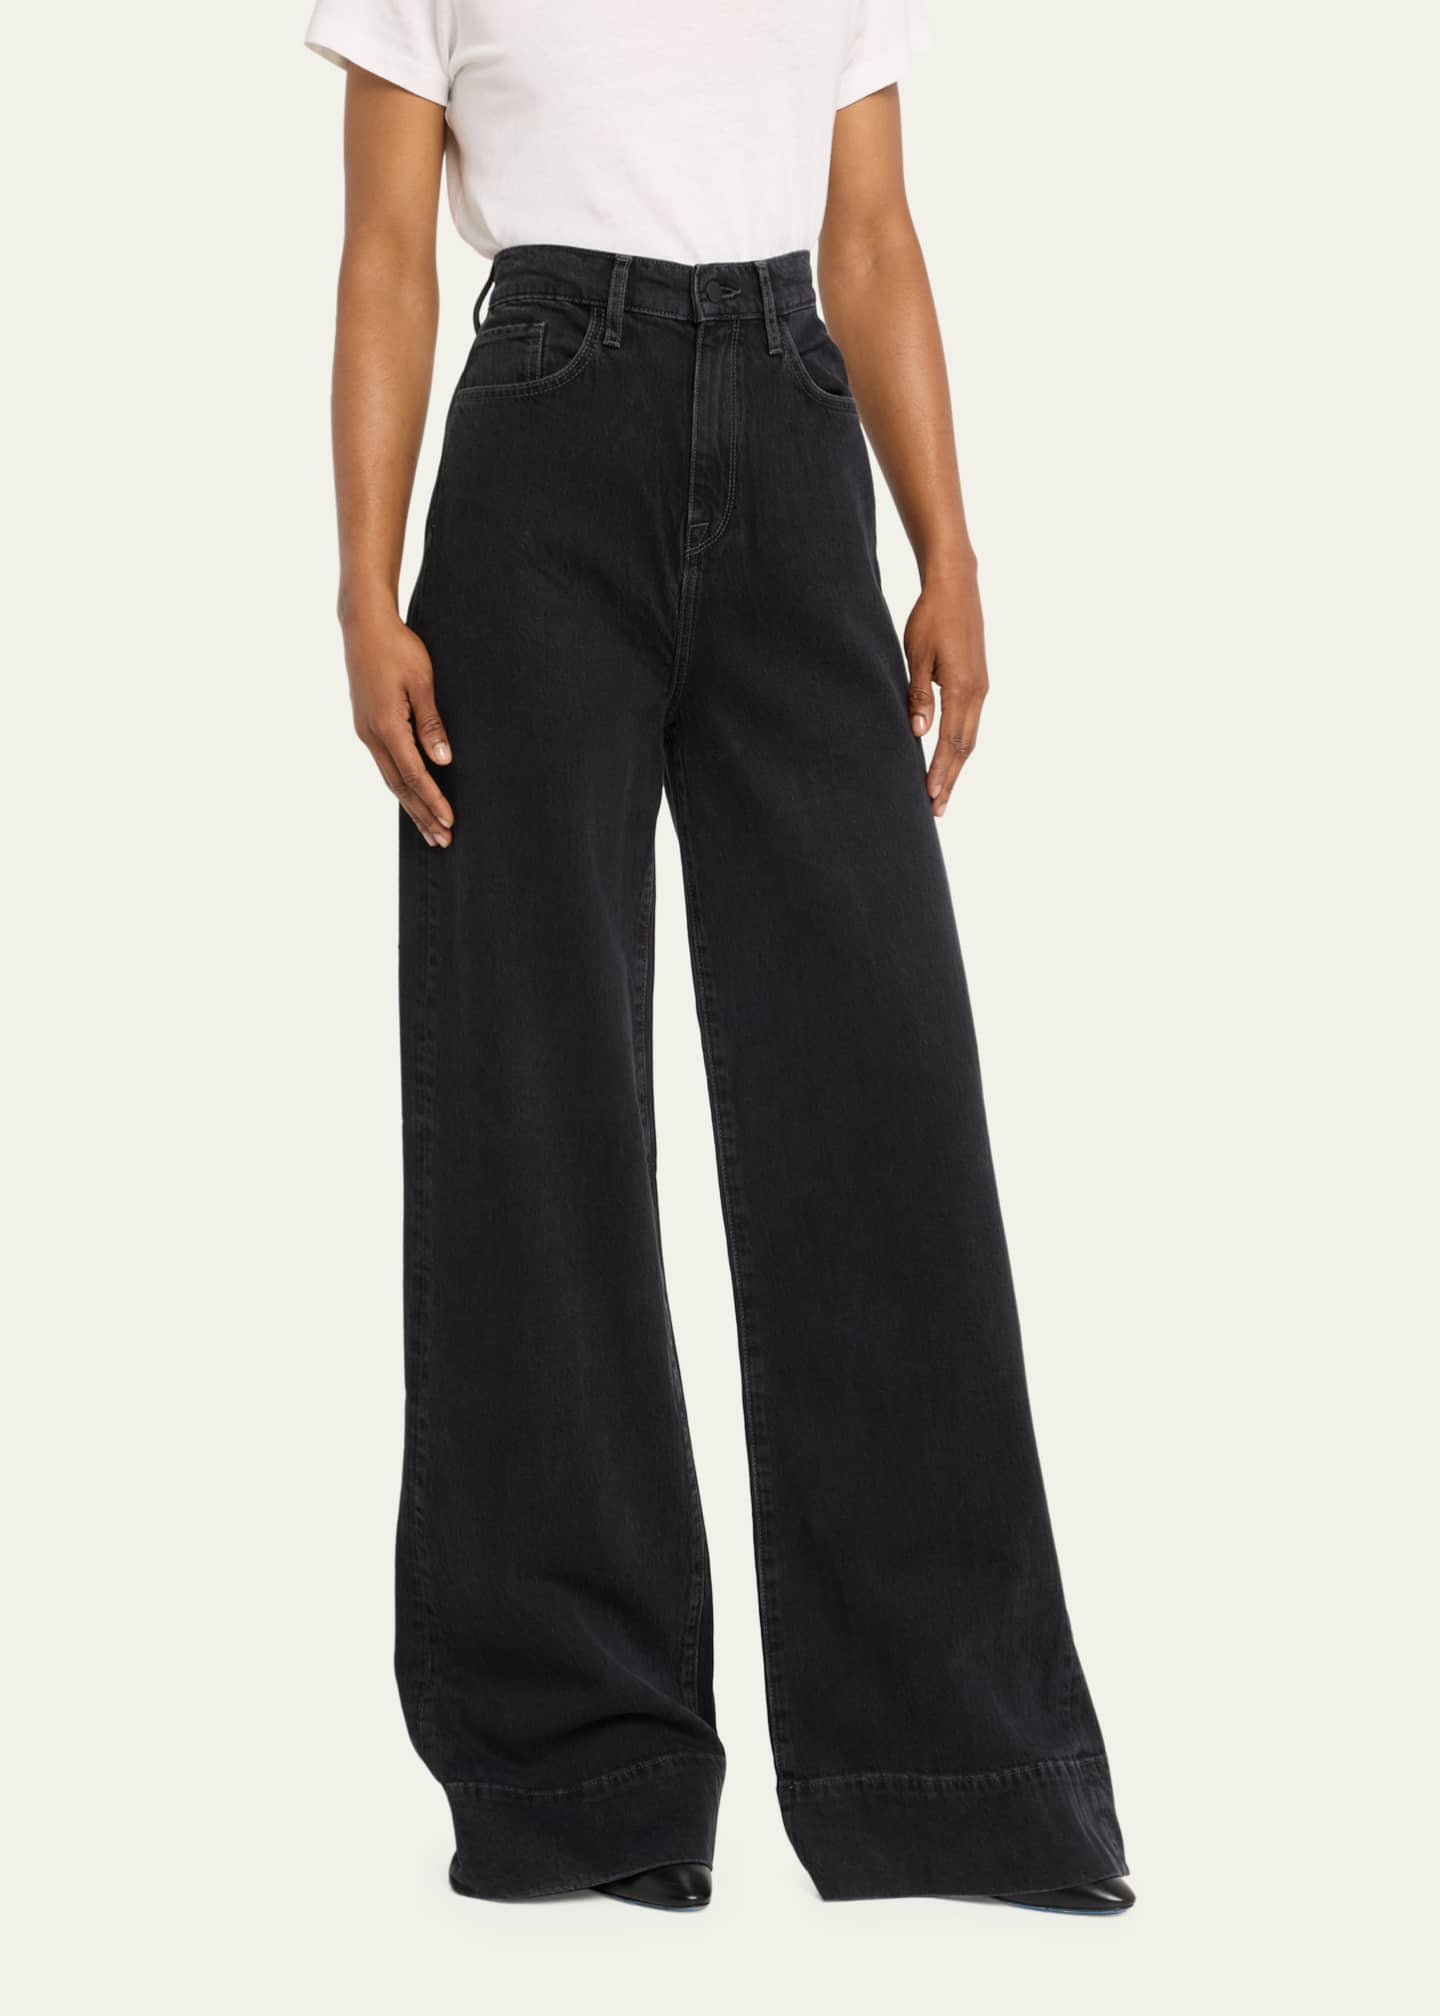 Triarchy Ms. Onassis High Rise Wide-Leg Jeans - Bergdorf Goodman